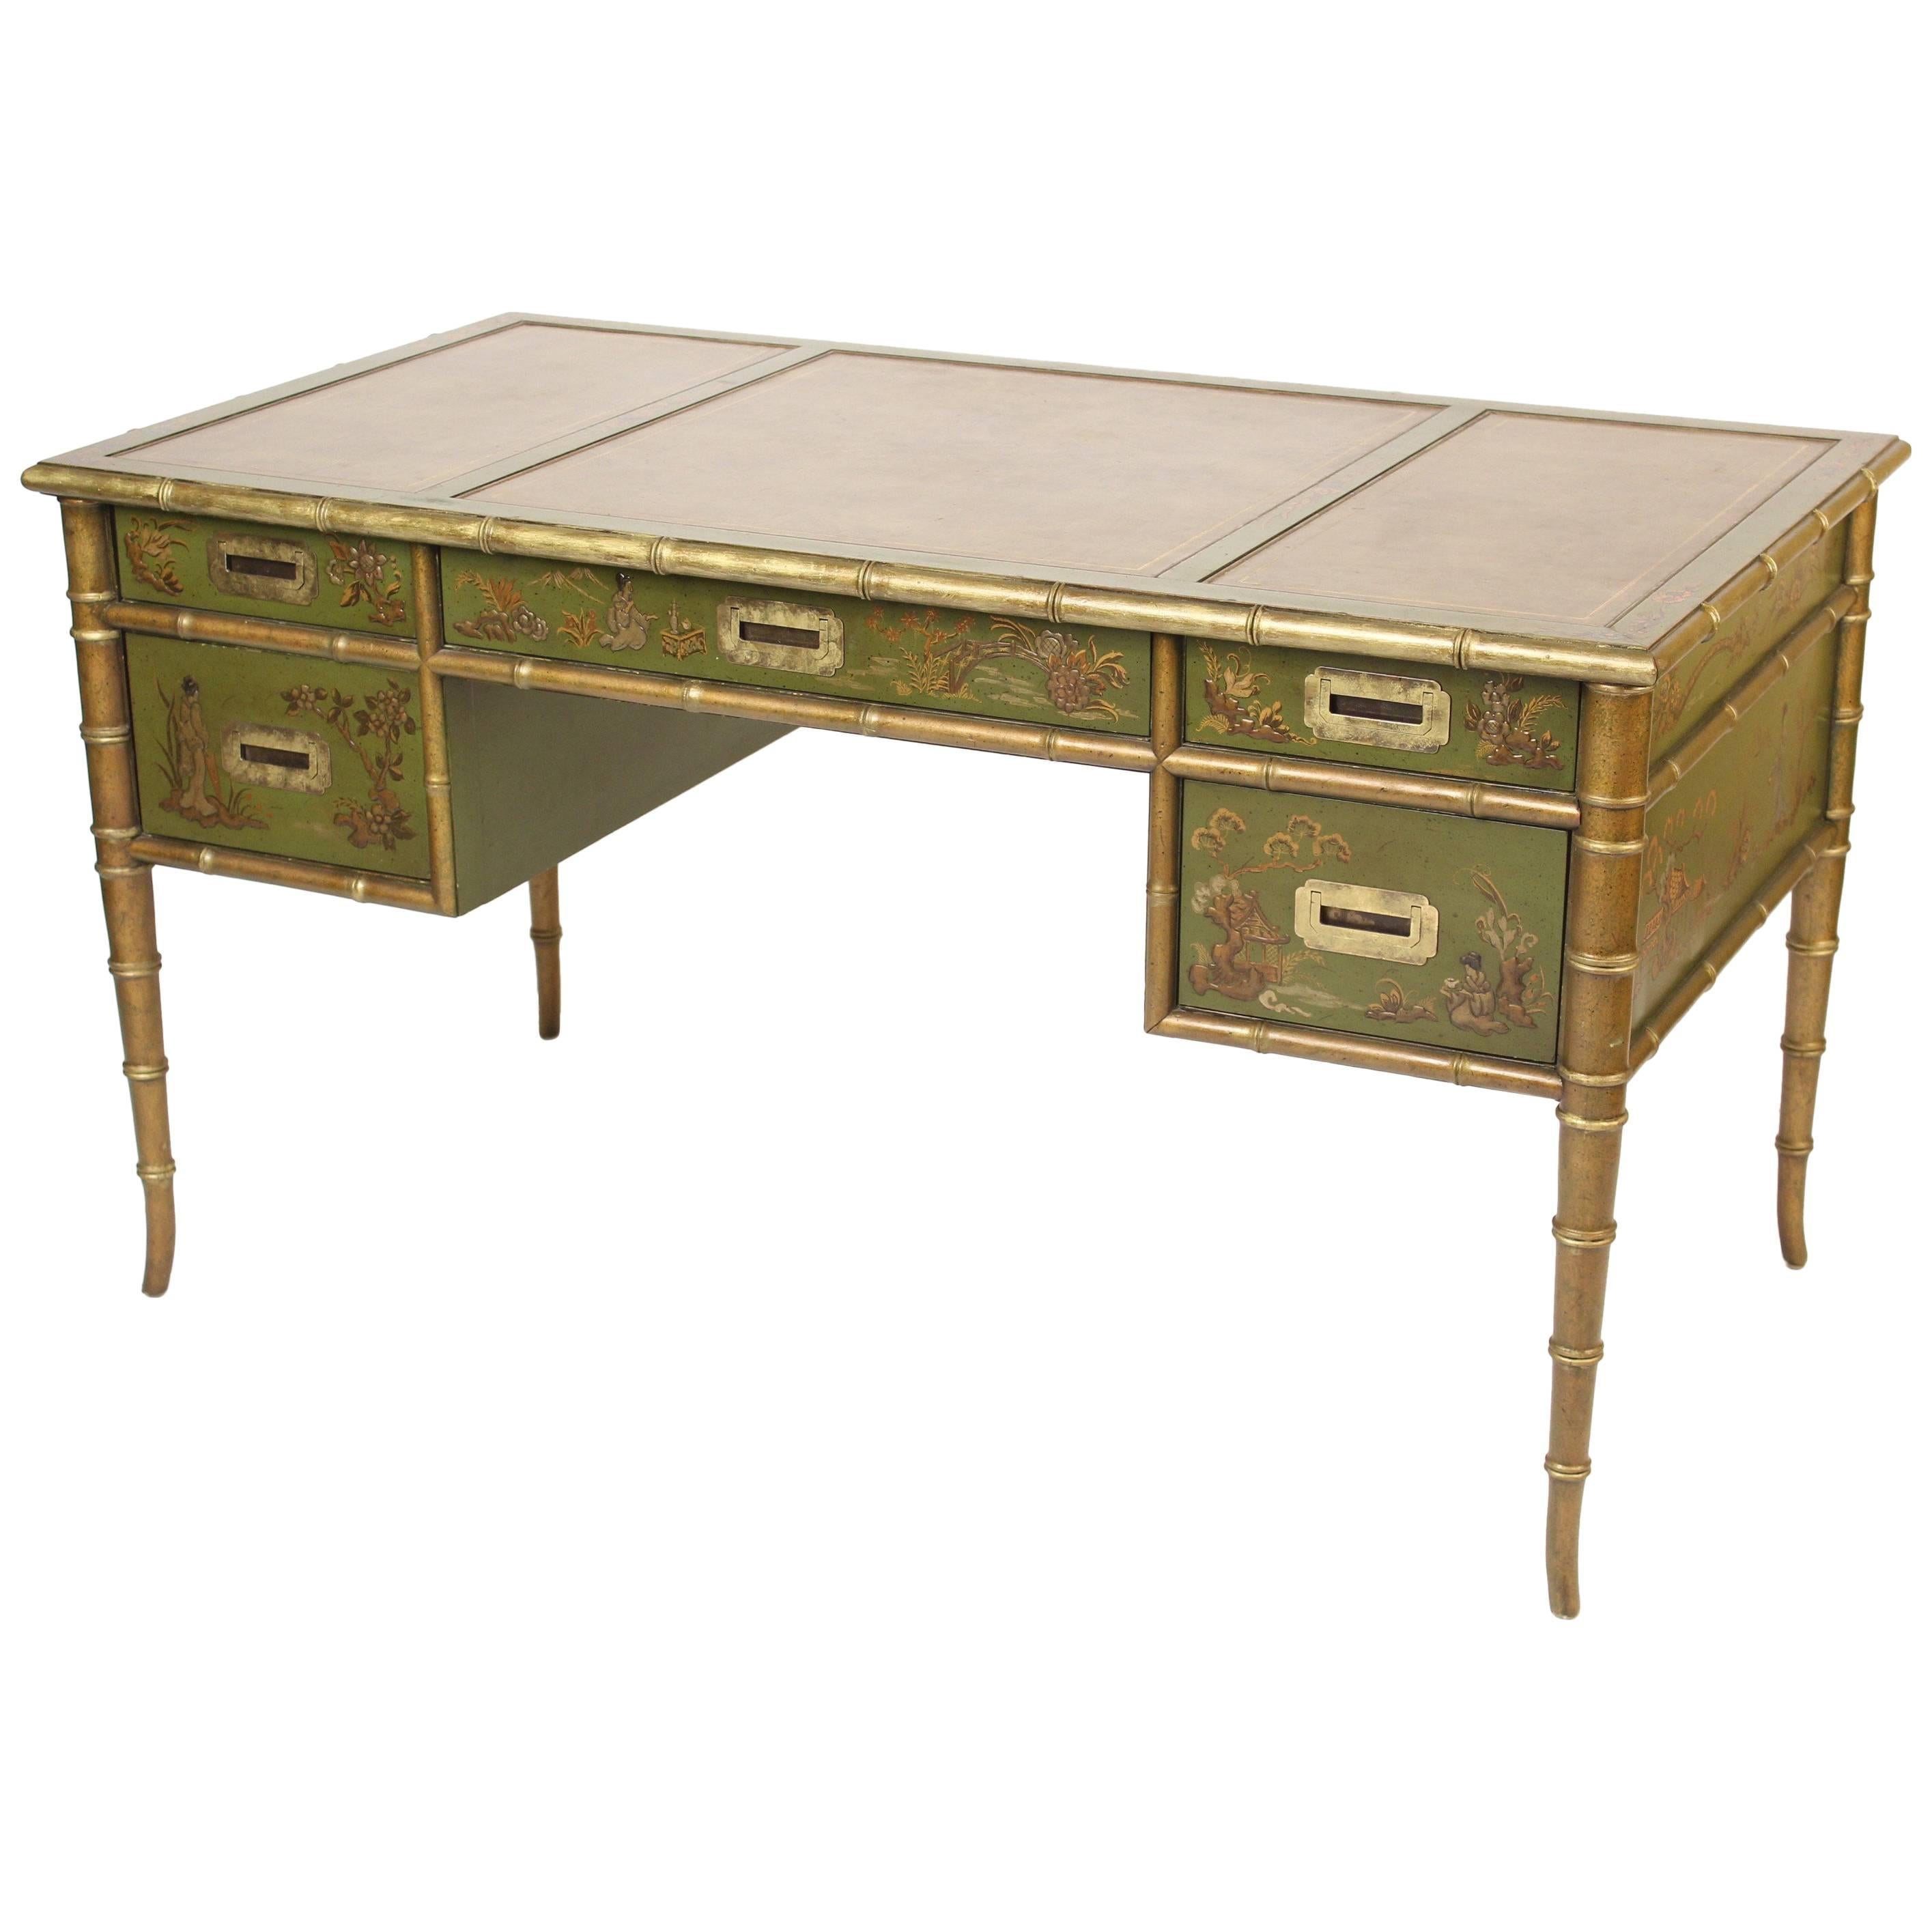 English Regency Style Chinoiserie Decorated Desk